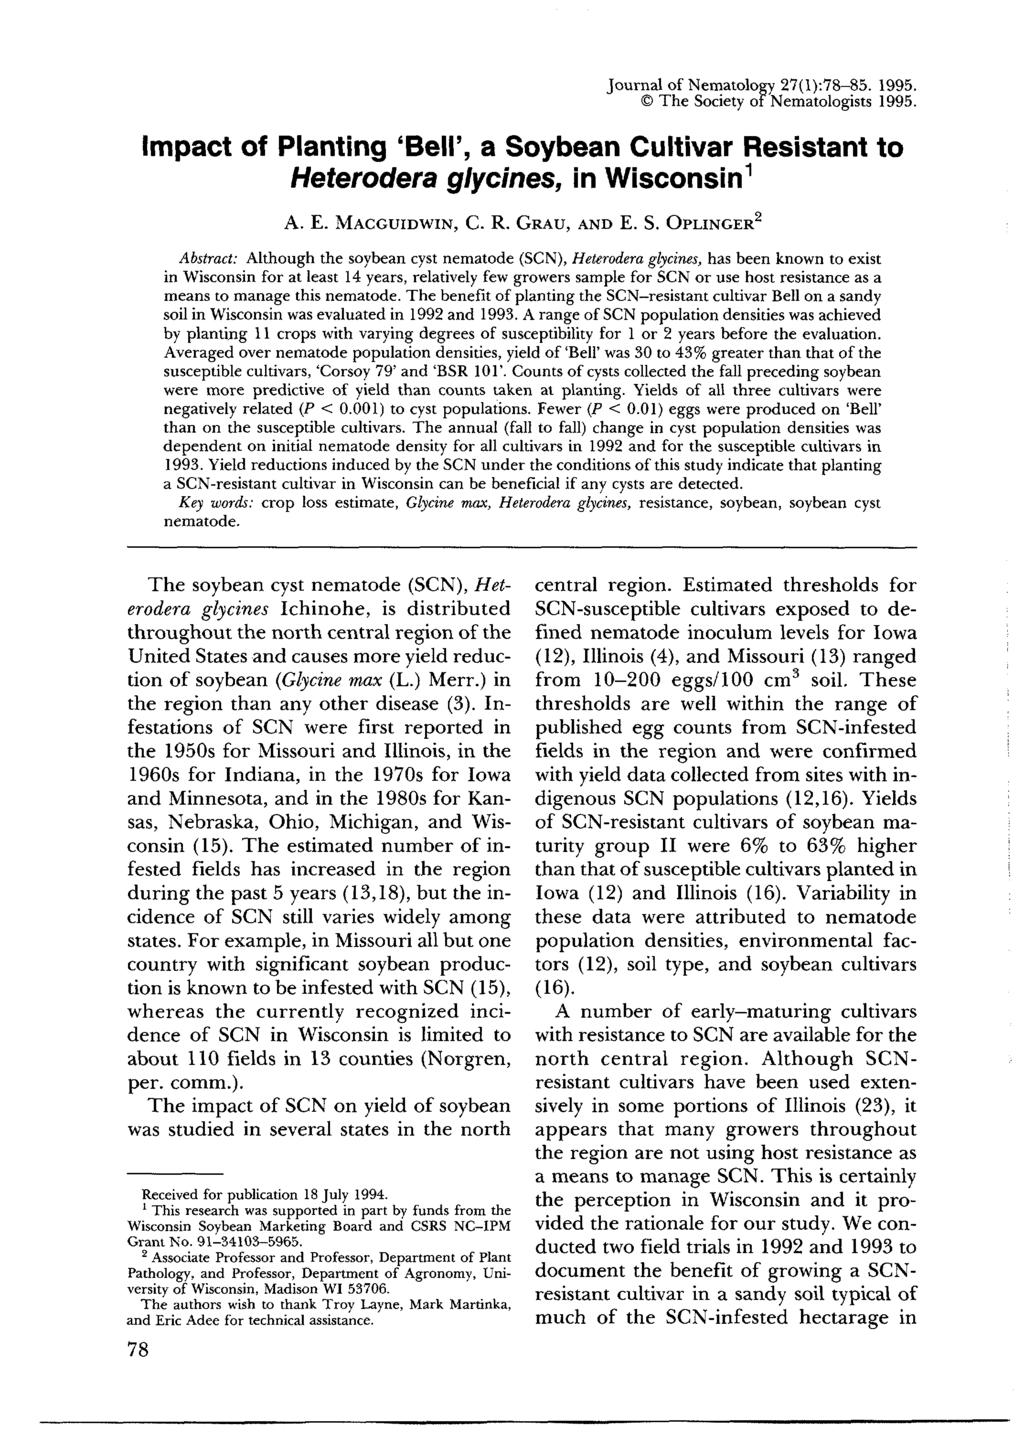 Journal of Nematology 27(I):78-85. 1995. The Society of Nematologists 1995. Impact of Planting 'Bell', a Soybean Cultivar Resistant to Heterodera glycines, in Wisconsin1 A. E. MACGUIDWlN, C. R. GRAU, AND E.